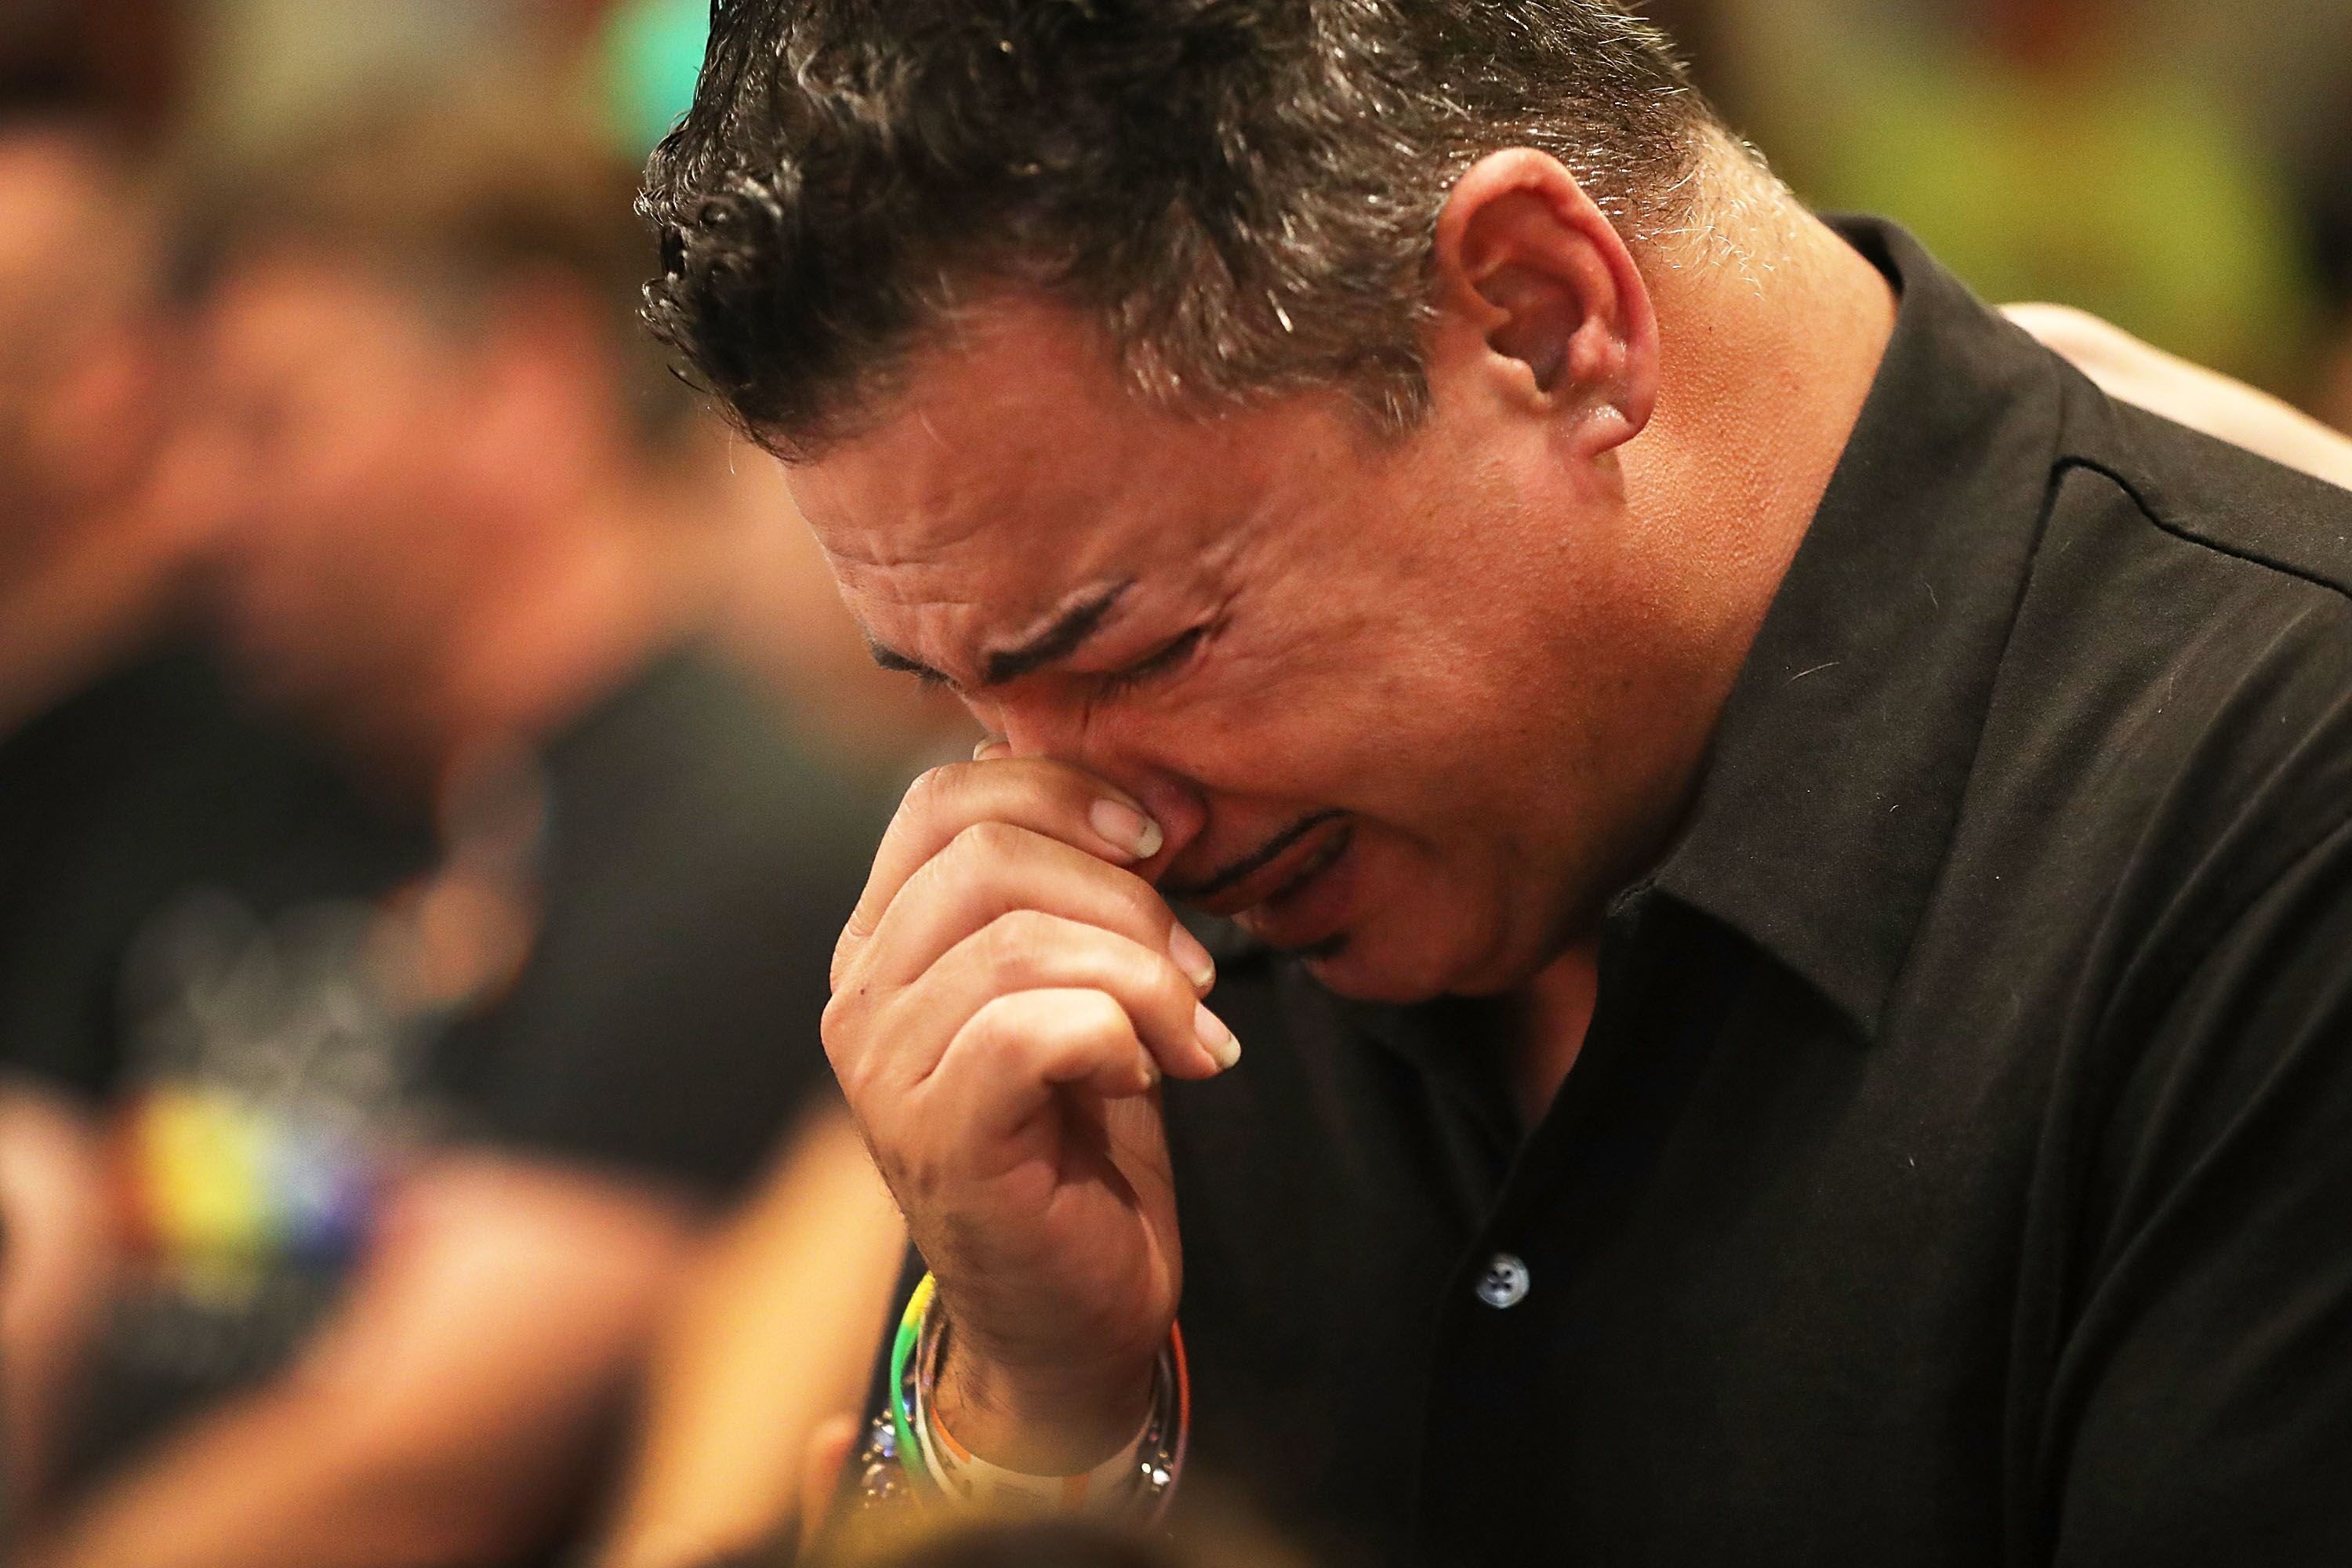 orlando man who was injured in the mass shooting at the pulse nightclub cries as he attends a memorial service at the joy mcc church for the victims of the terror attack where omar mateen allegedly killed more than 50 people on june 12 2016 in orlando florida photo afp